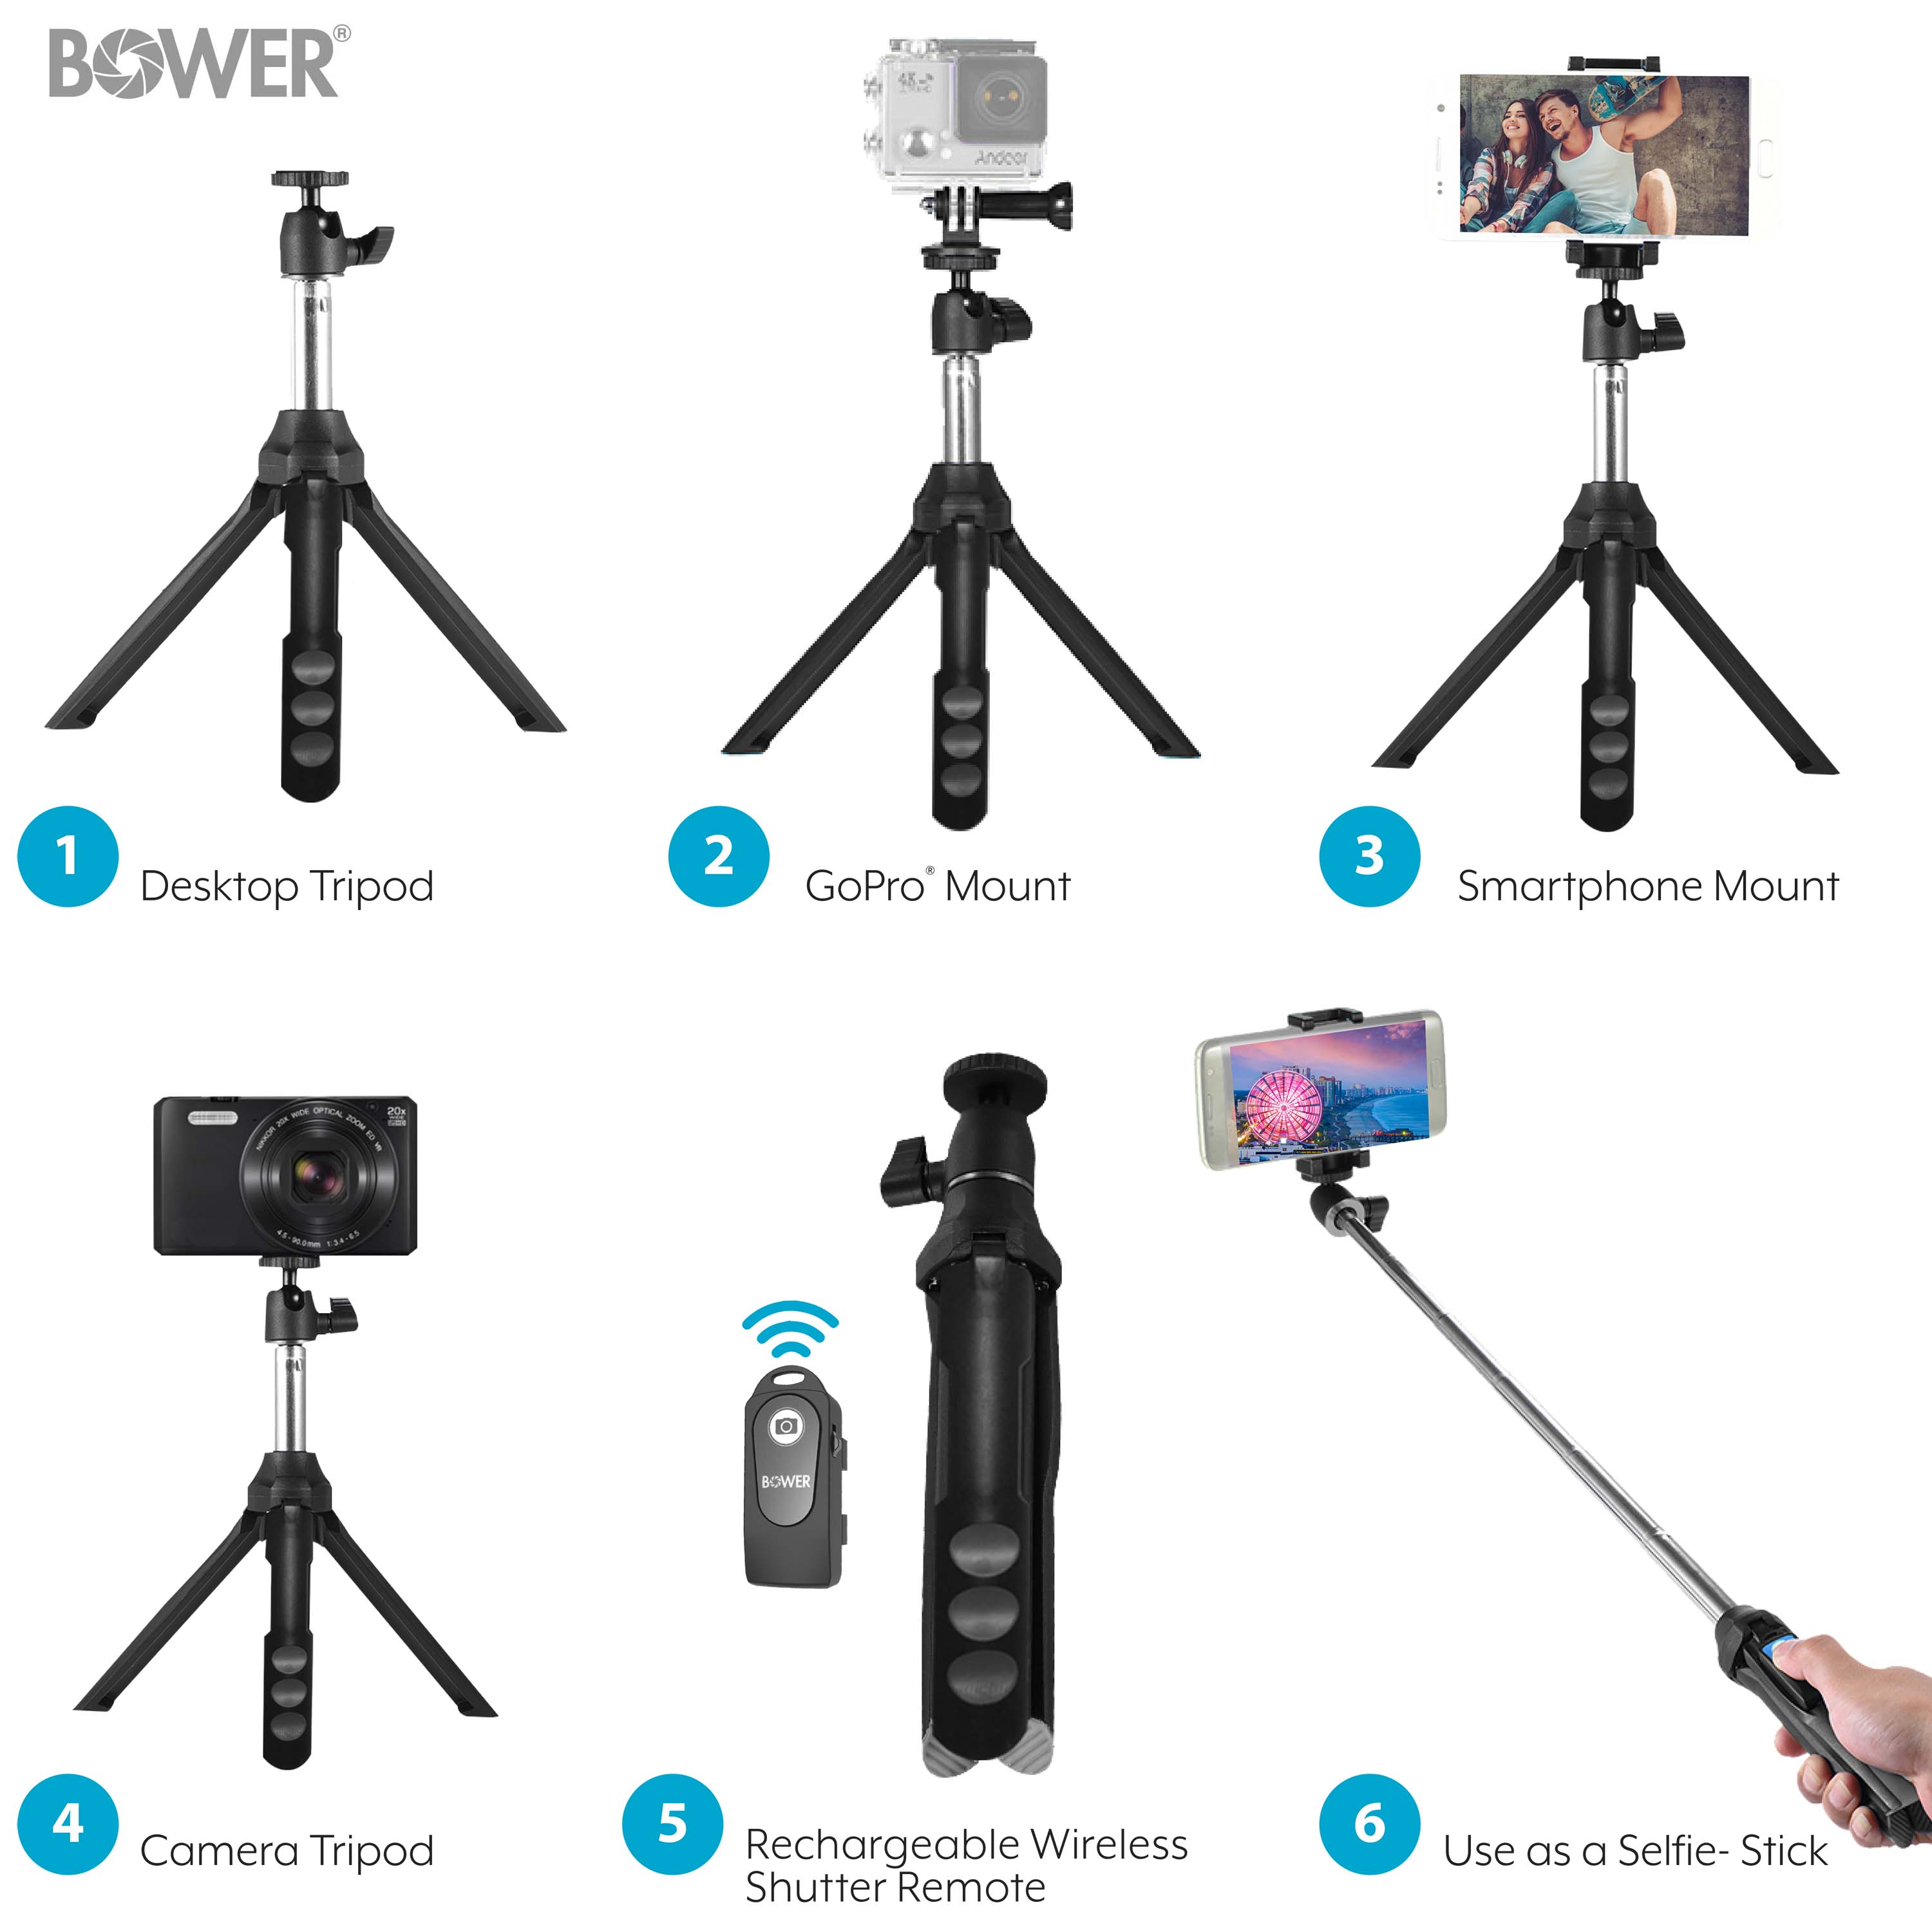 Bower 6 -in-1 Multi Selfie Tripod with Smartphone, GoPro Mount, and Rechargeable Wireless Remote, Black - image 4 of 7